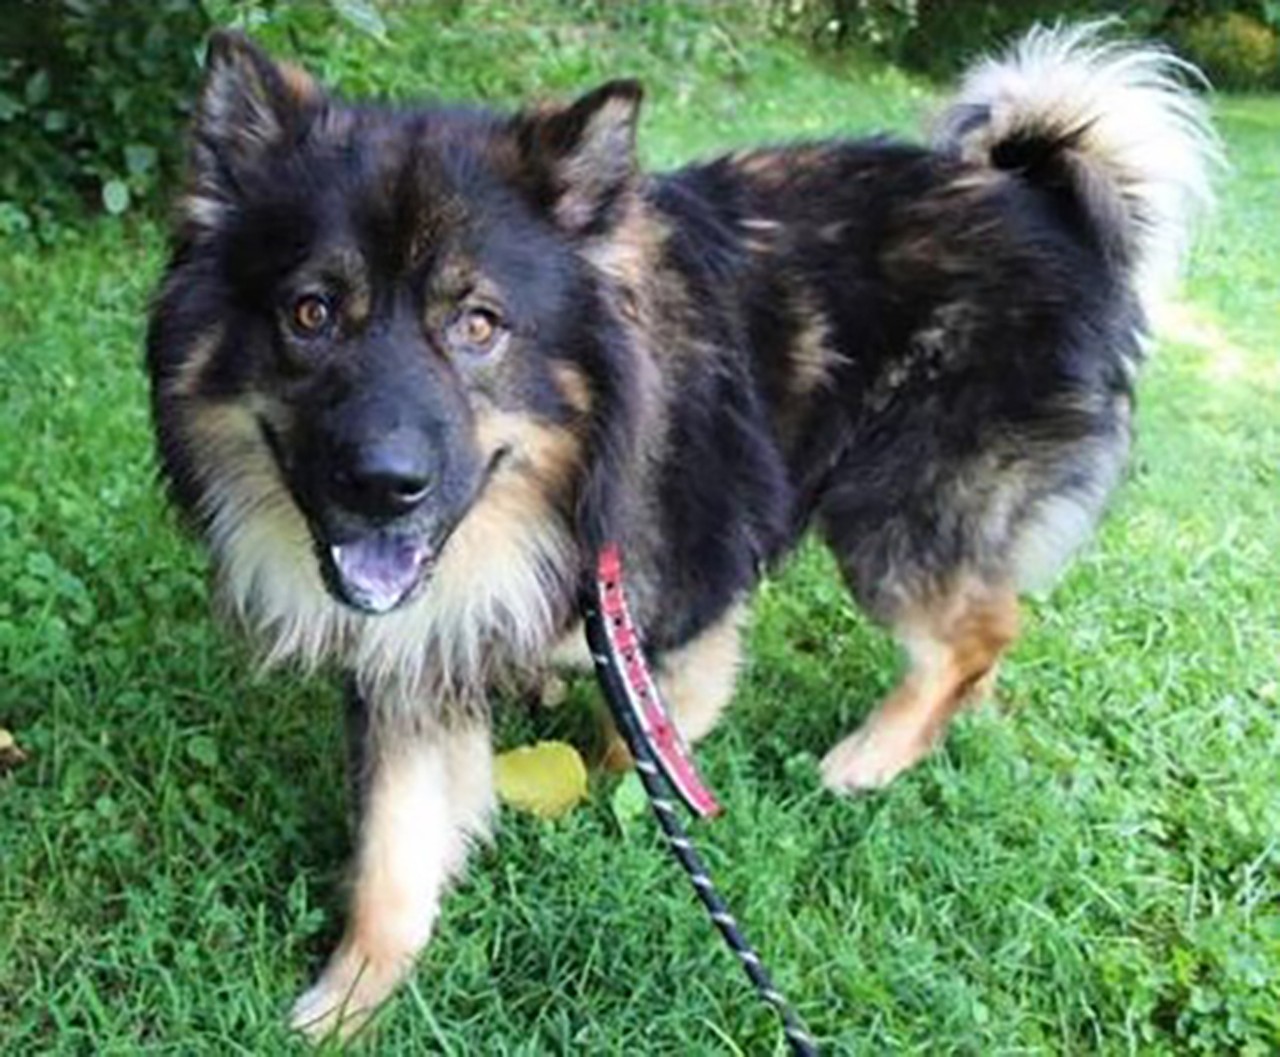 Chewbacca
Age: 2 years old | Breed: Chow Chow/Keeshond | Sex: Male | Rescue: SAAP 
Photo via adoptastray.com